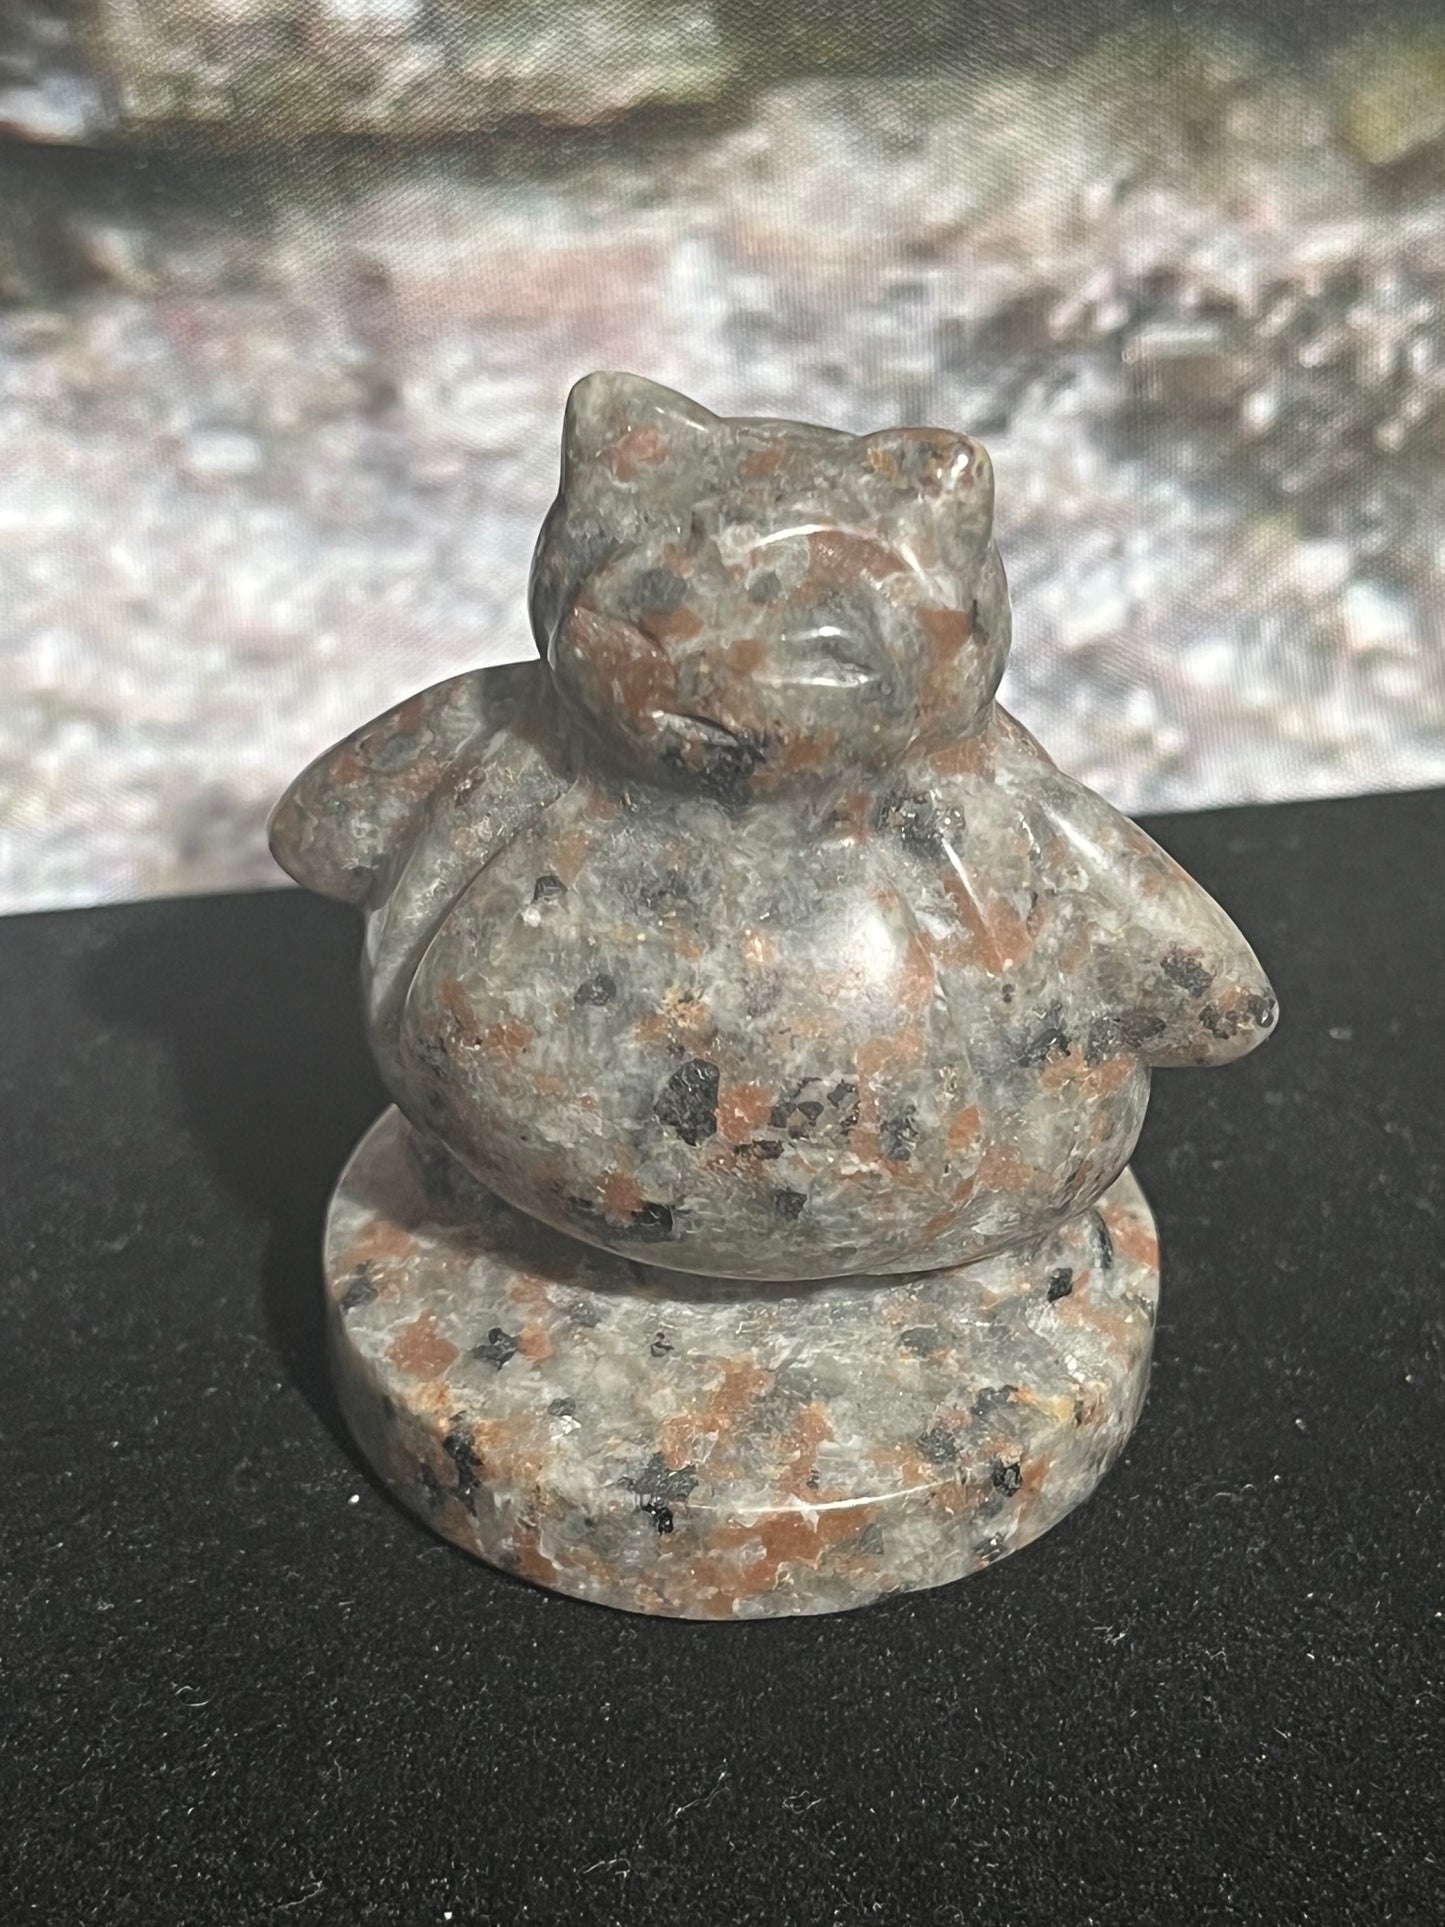 Anime fat cat stone/crystal carving